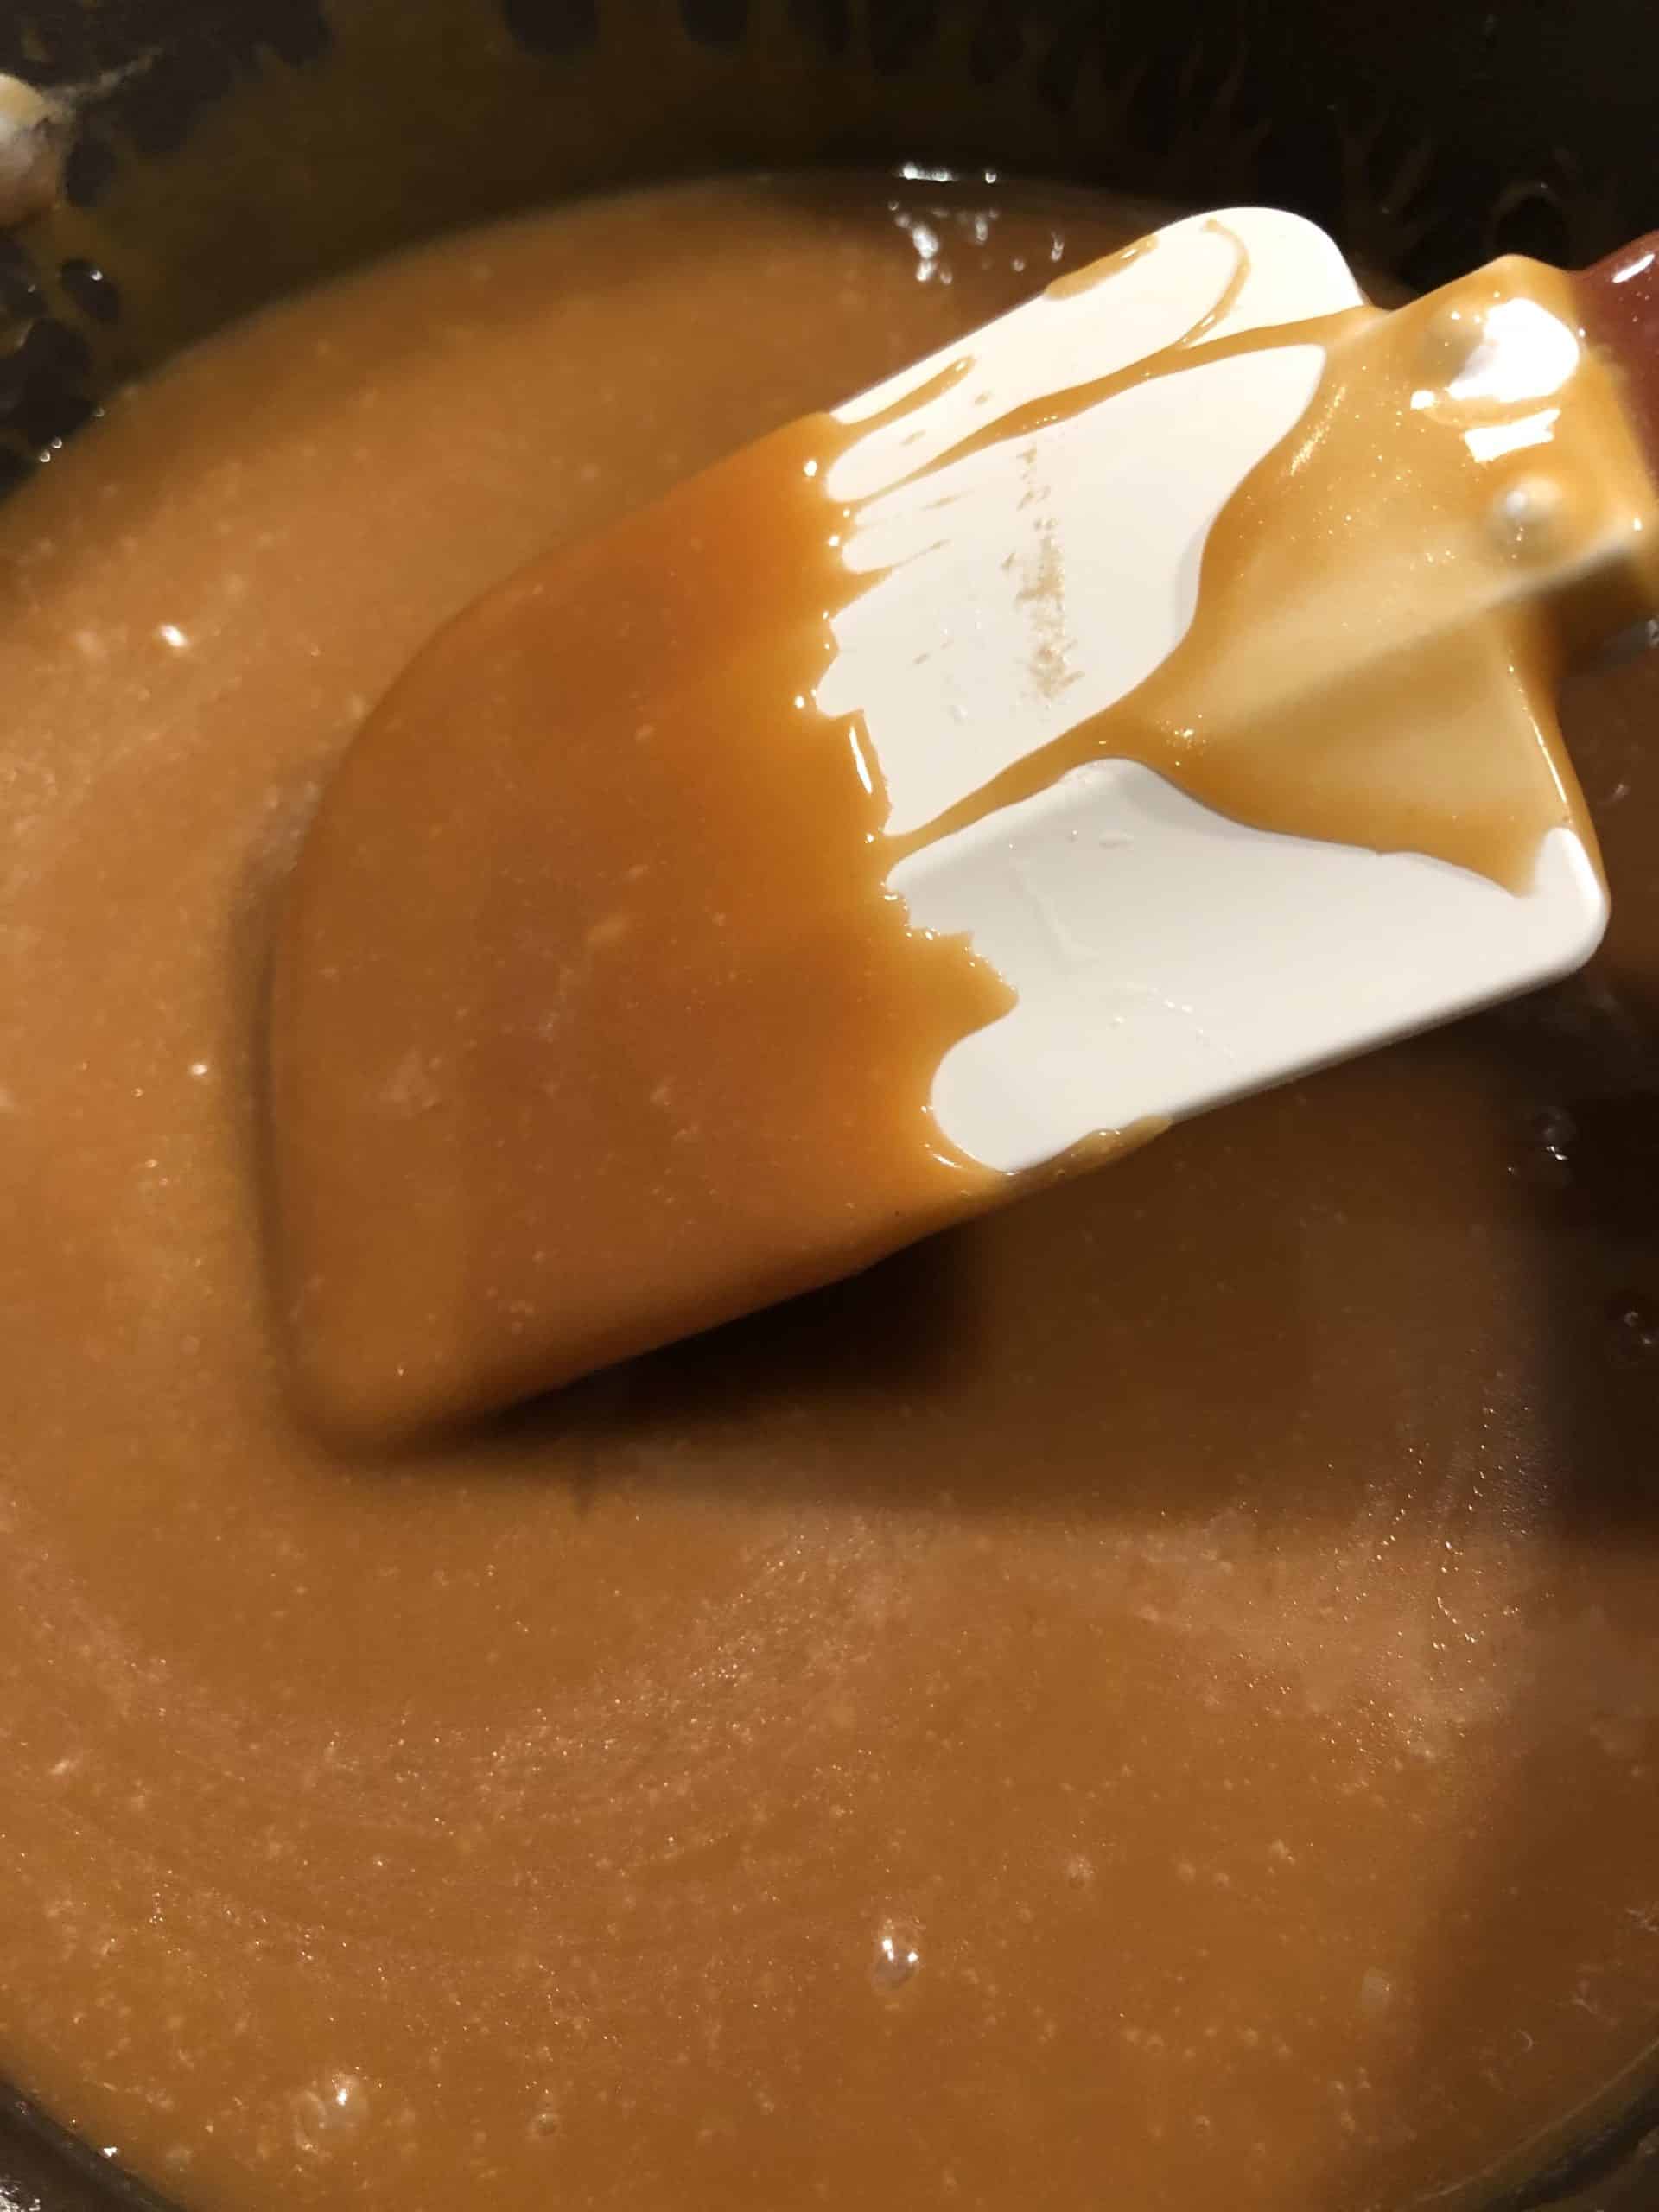 Fully cooked homemade caramel recipe.